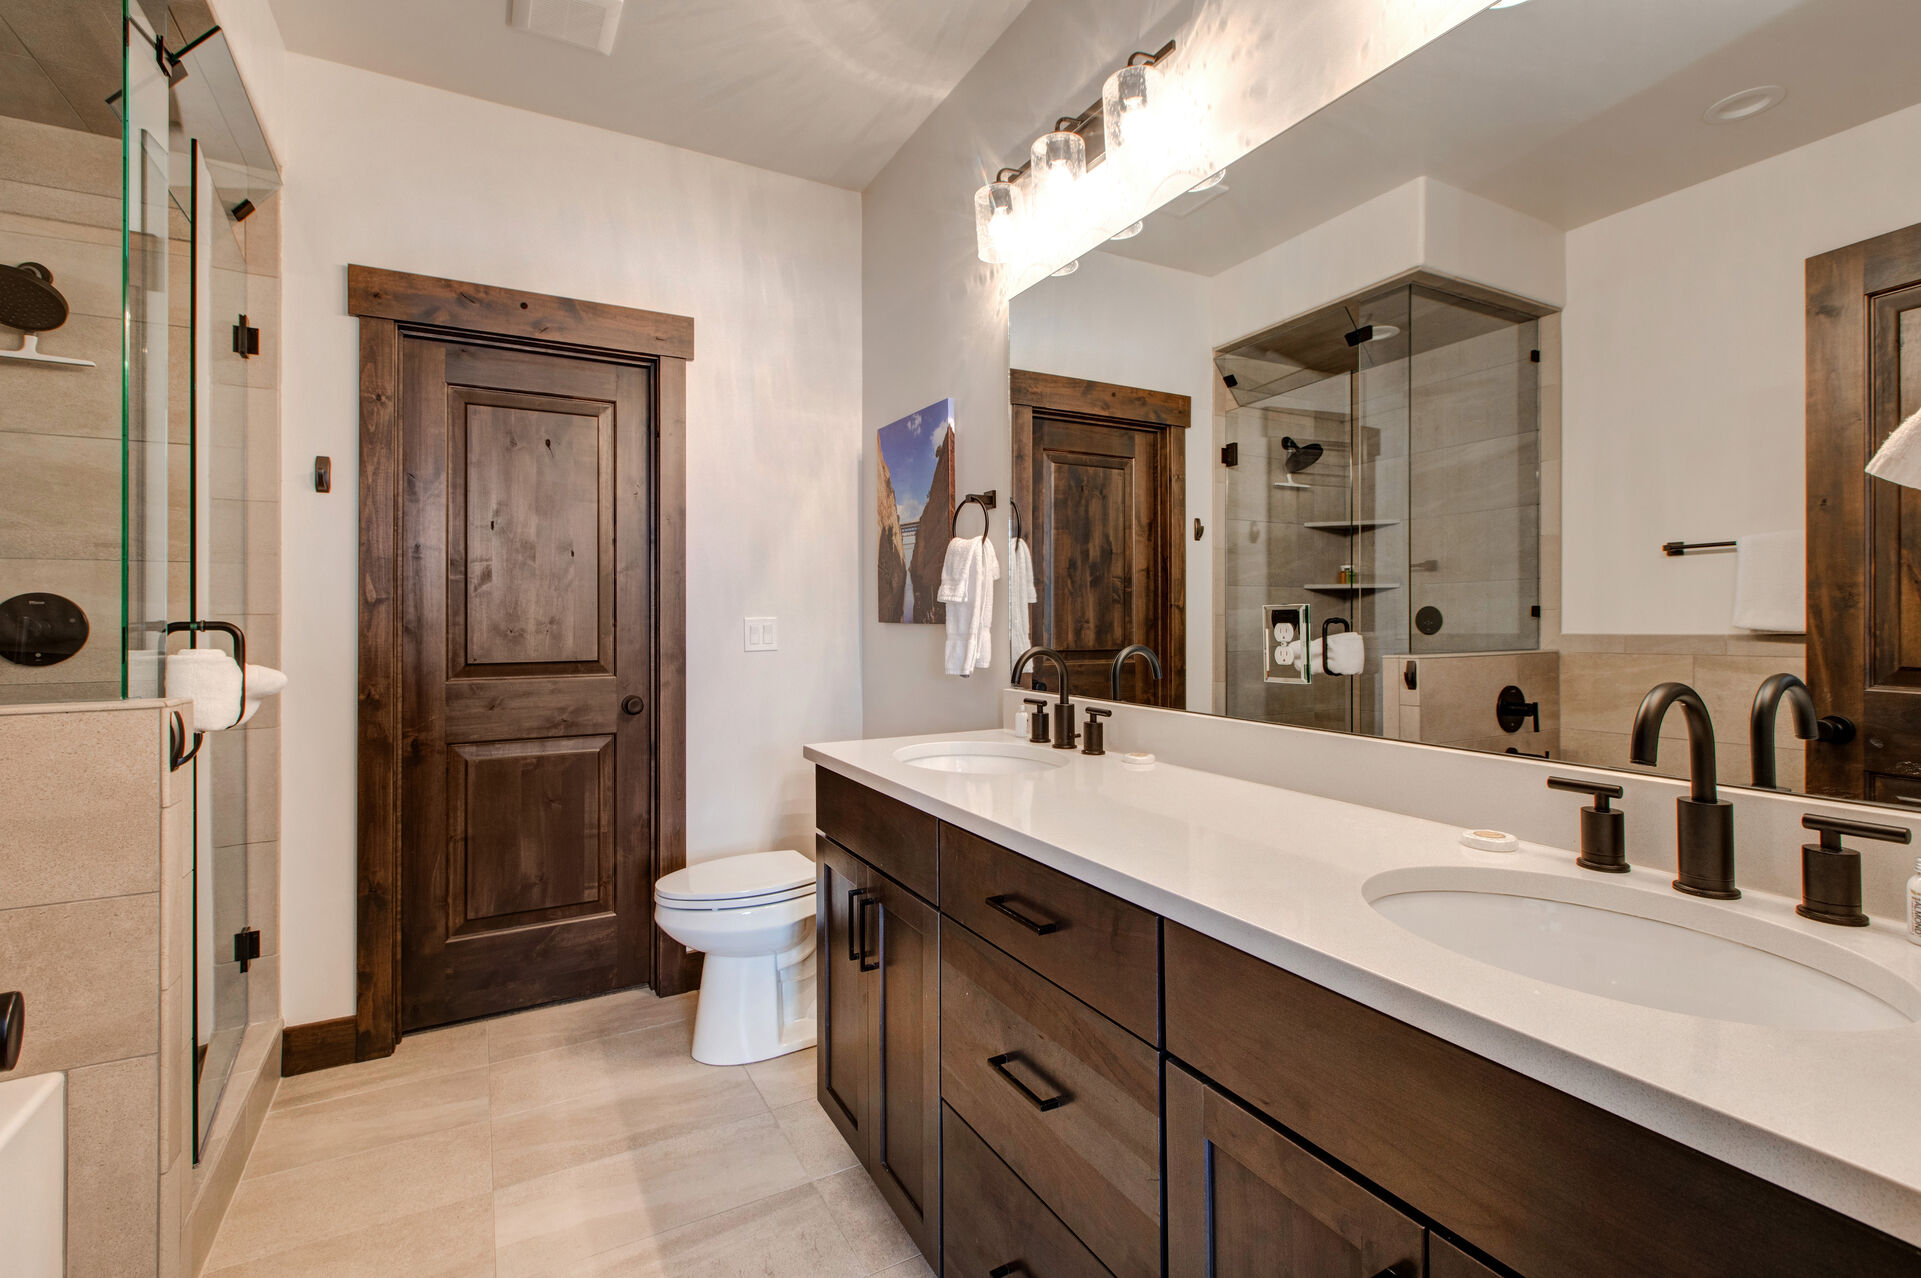 Master Bathroom with large tiled shower which also serves as a steam shower, separate soaking bathtub, and dual vanities